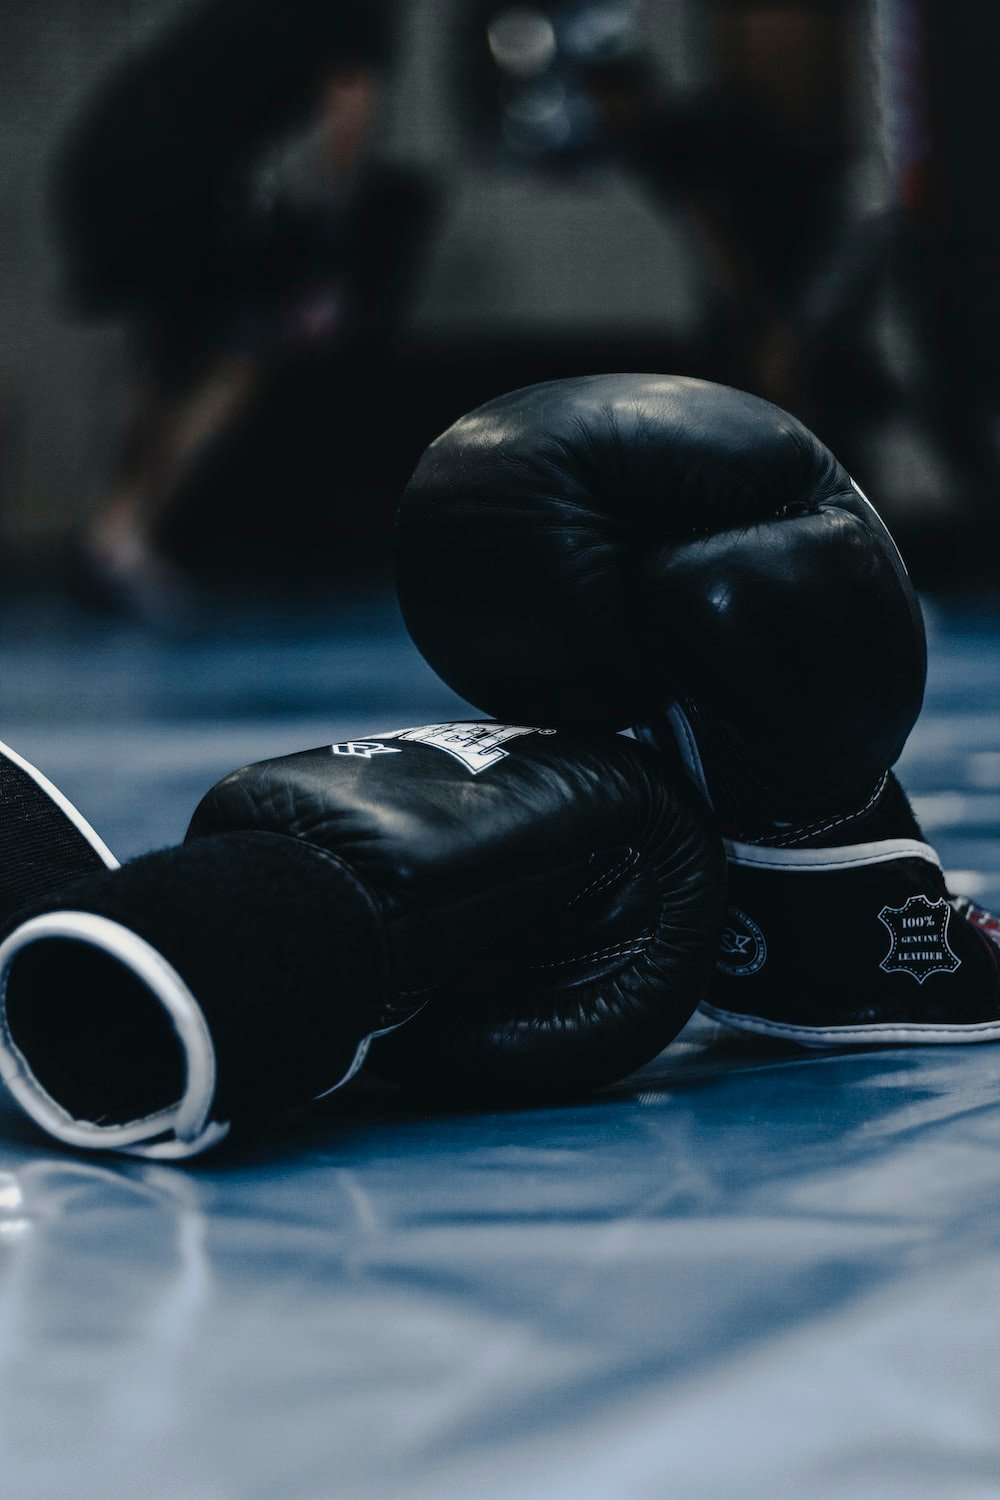 Boxing Gym Picture. Download Free Image